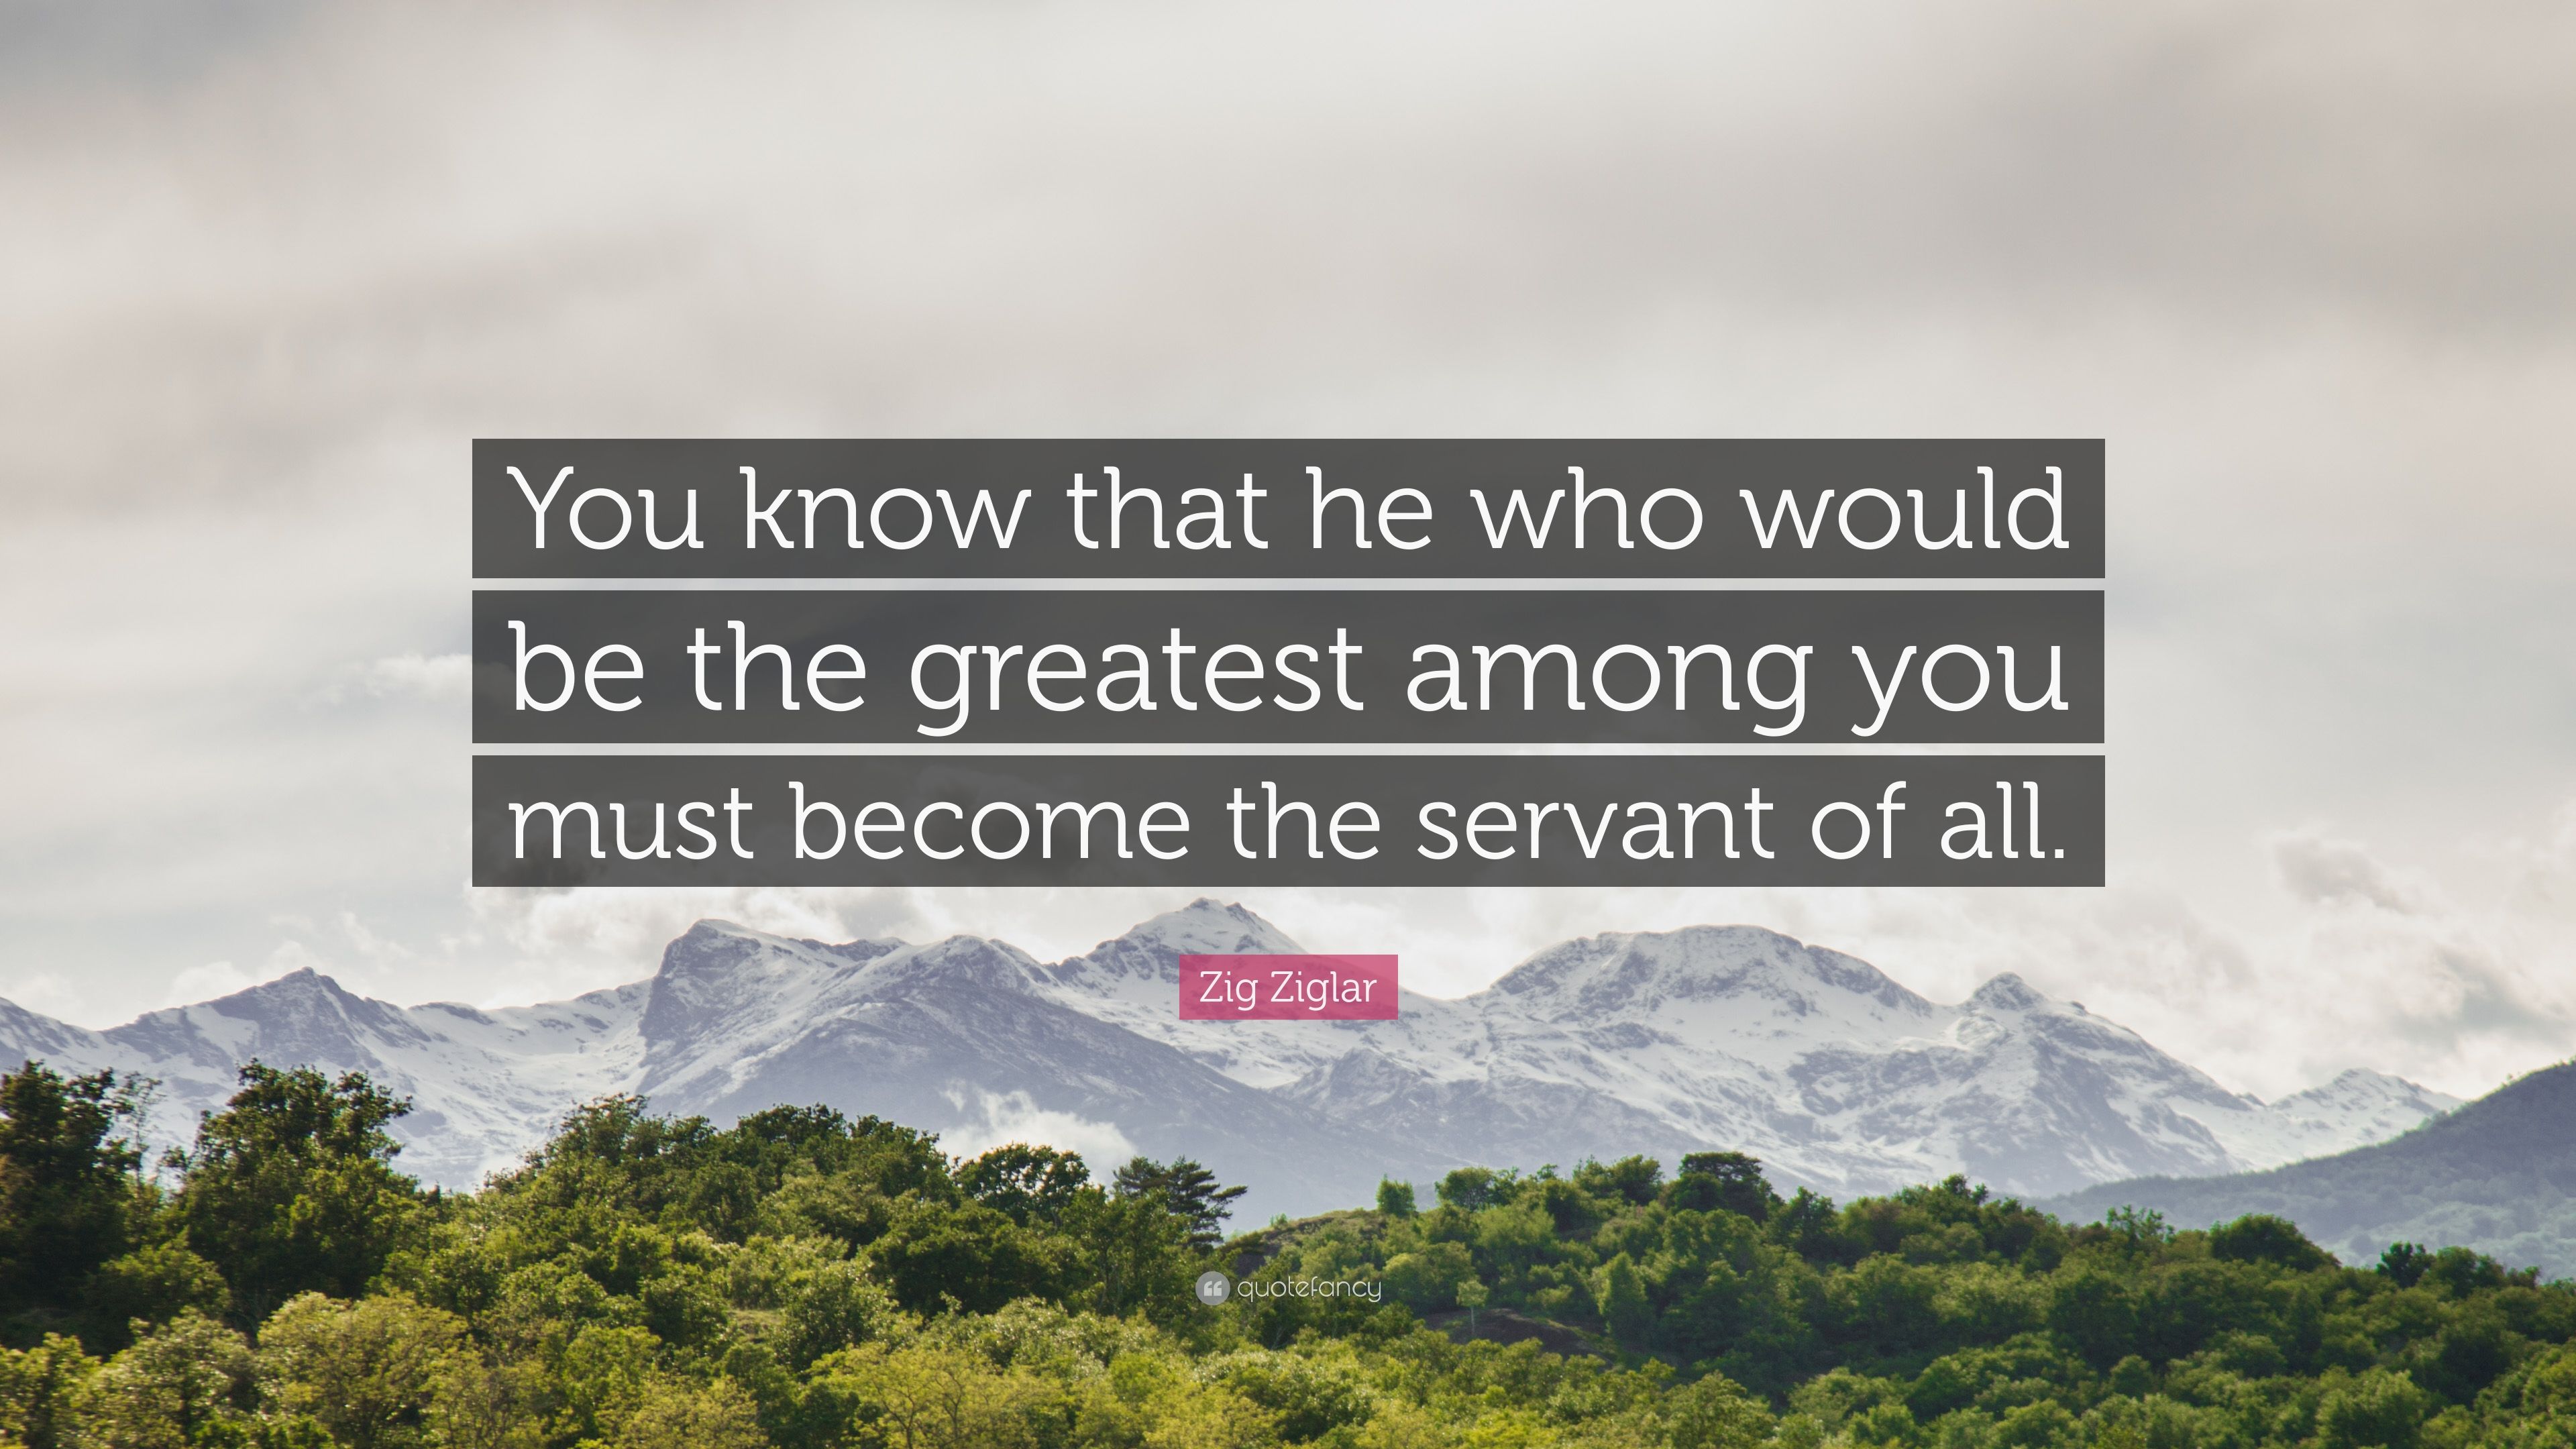 Zig Ziglar Quote: “You know that he who would be the greatest among ...